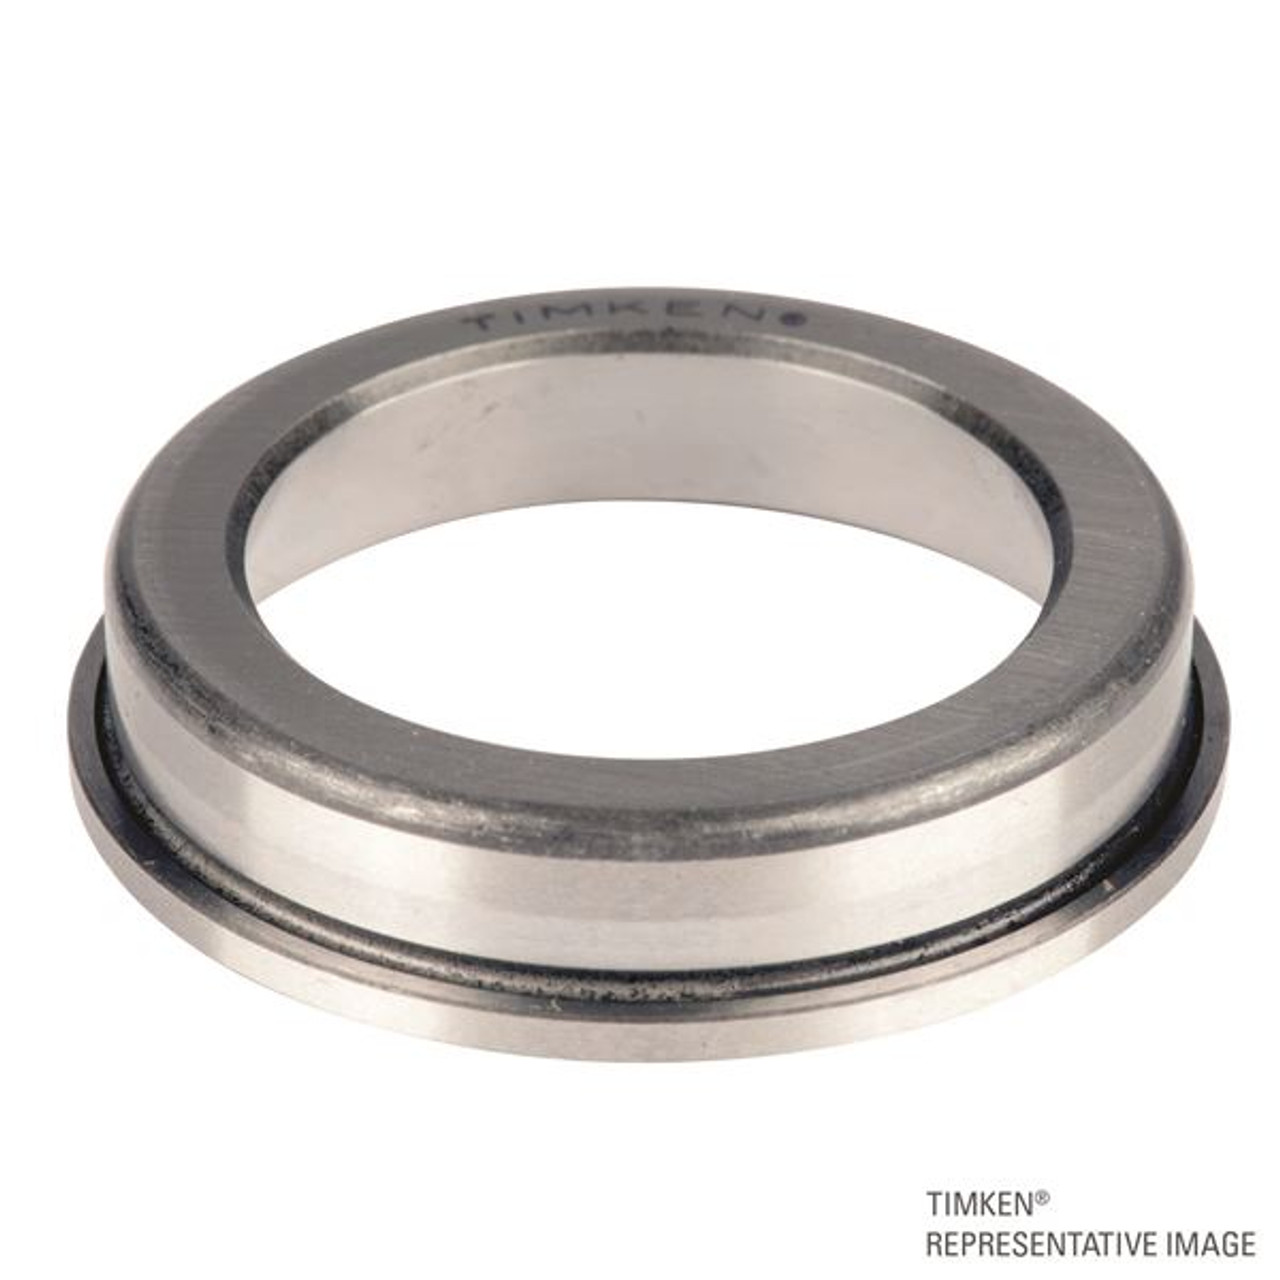 Timken® Single Row Flanged Cup  L624510B-2